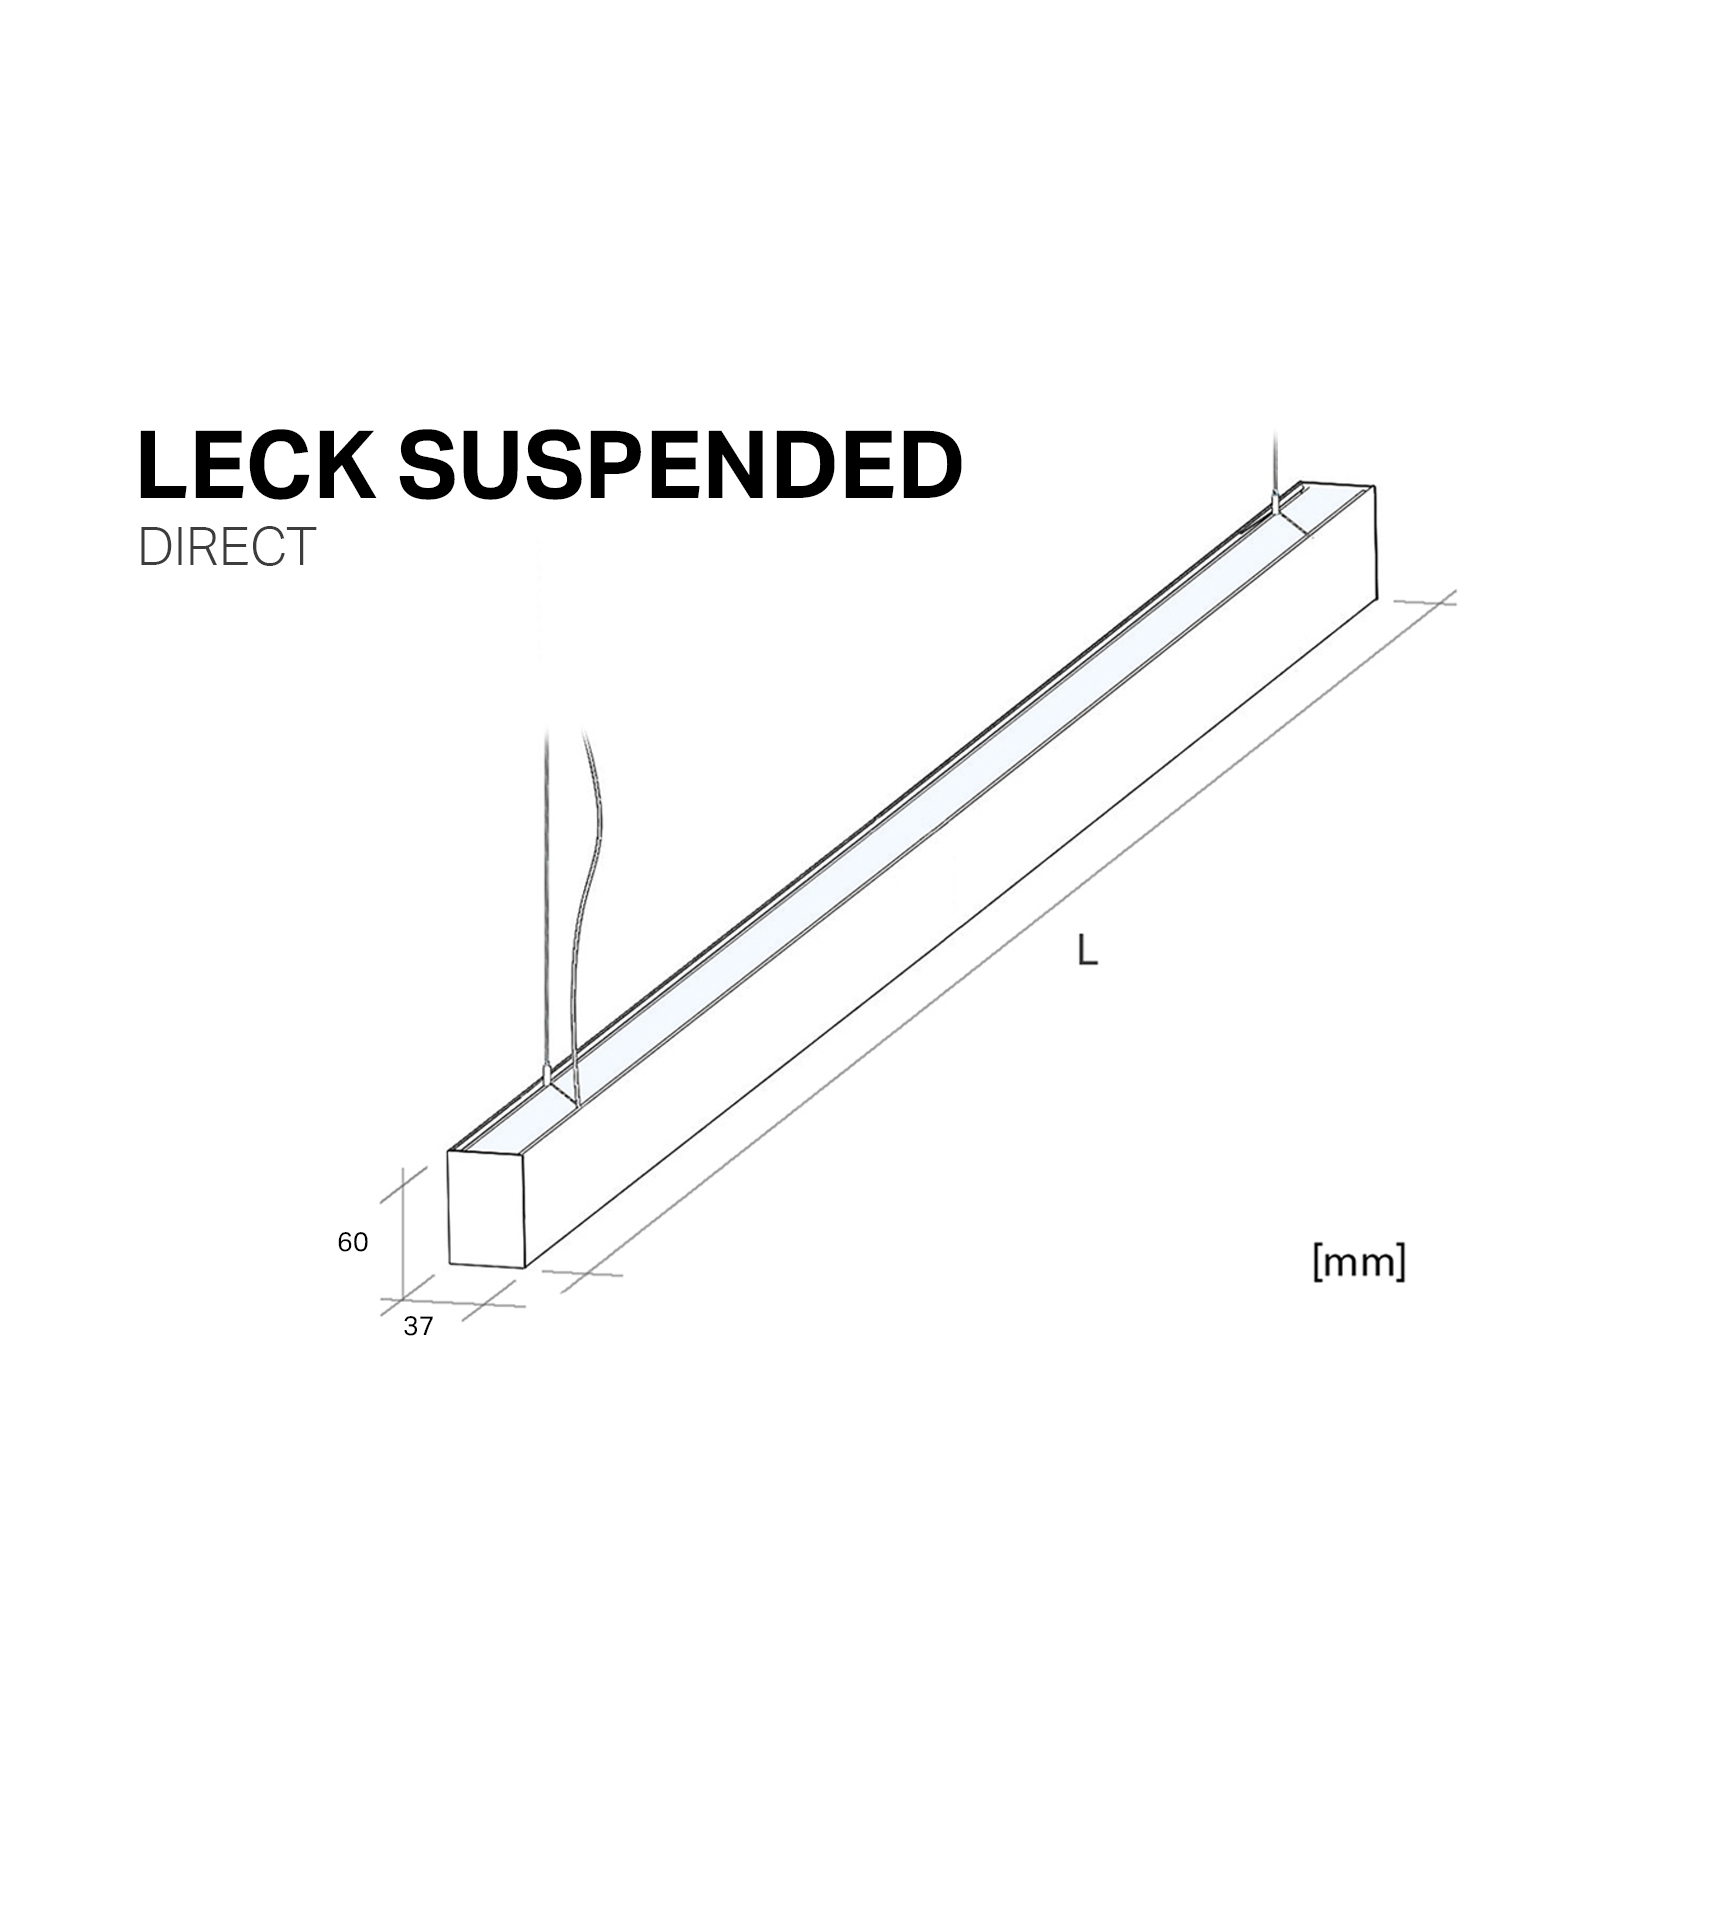 leck-suspended-direct-technical-drawing.psd